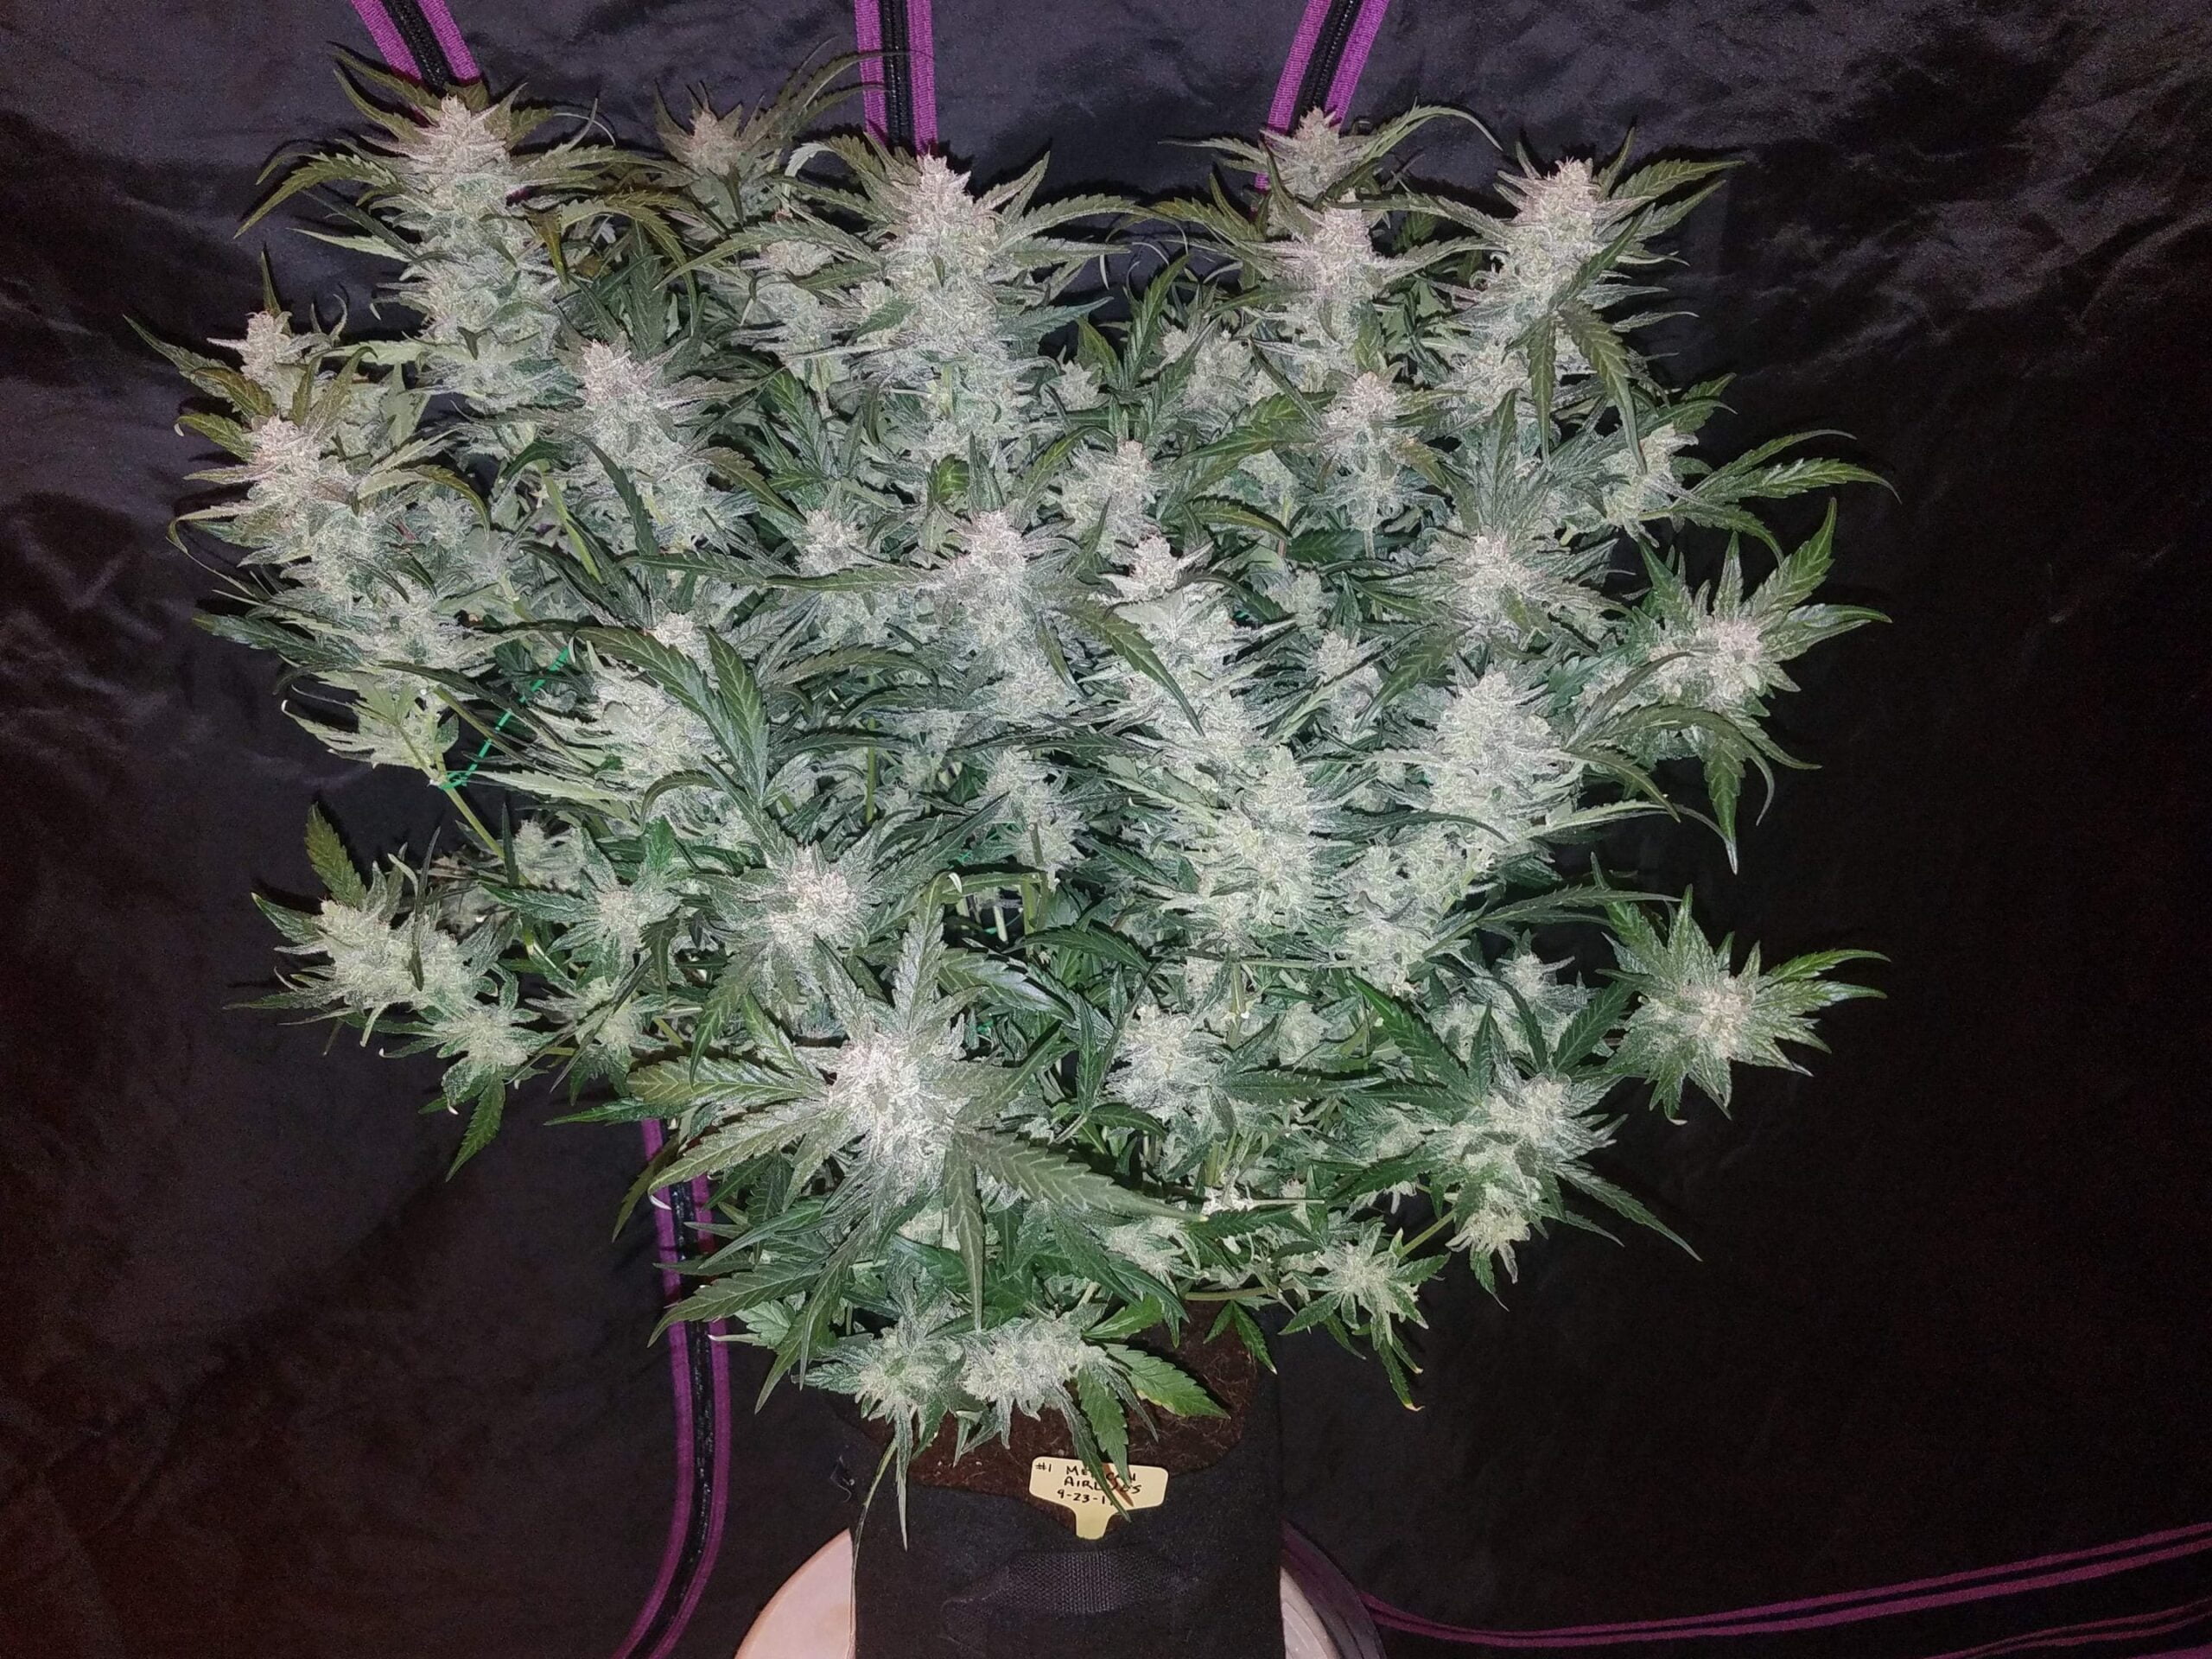 Mexican Airlines Auto » Fast Buds, Fast Buds - Autoflowering, Seeds